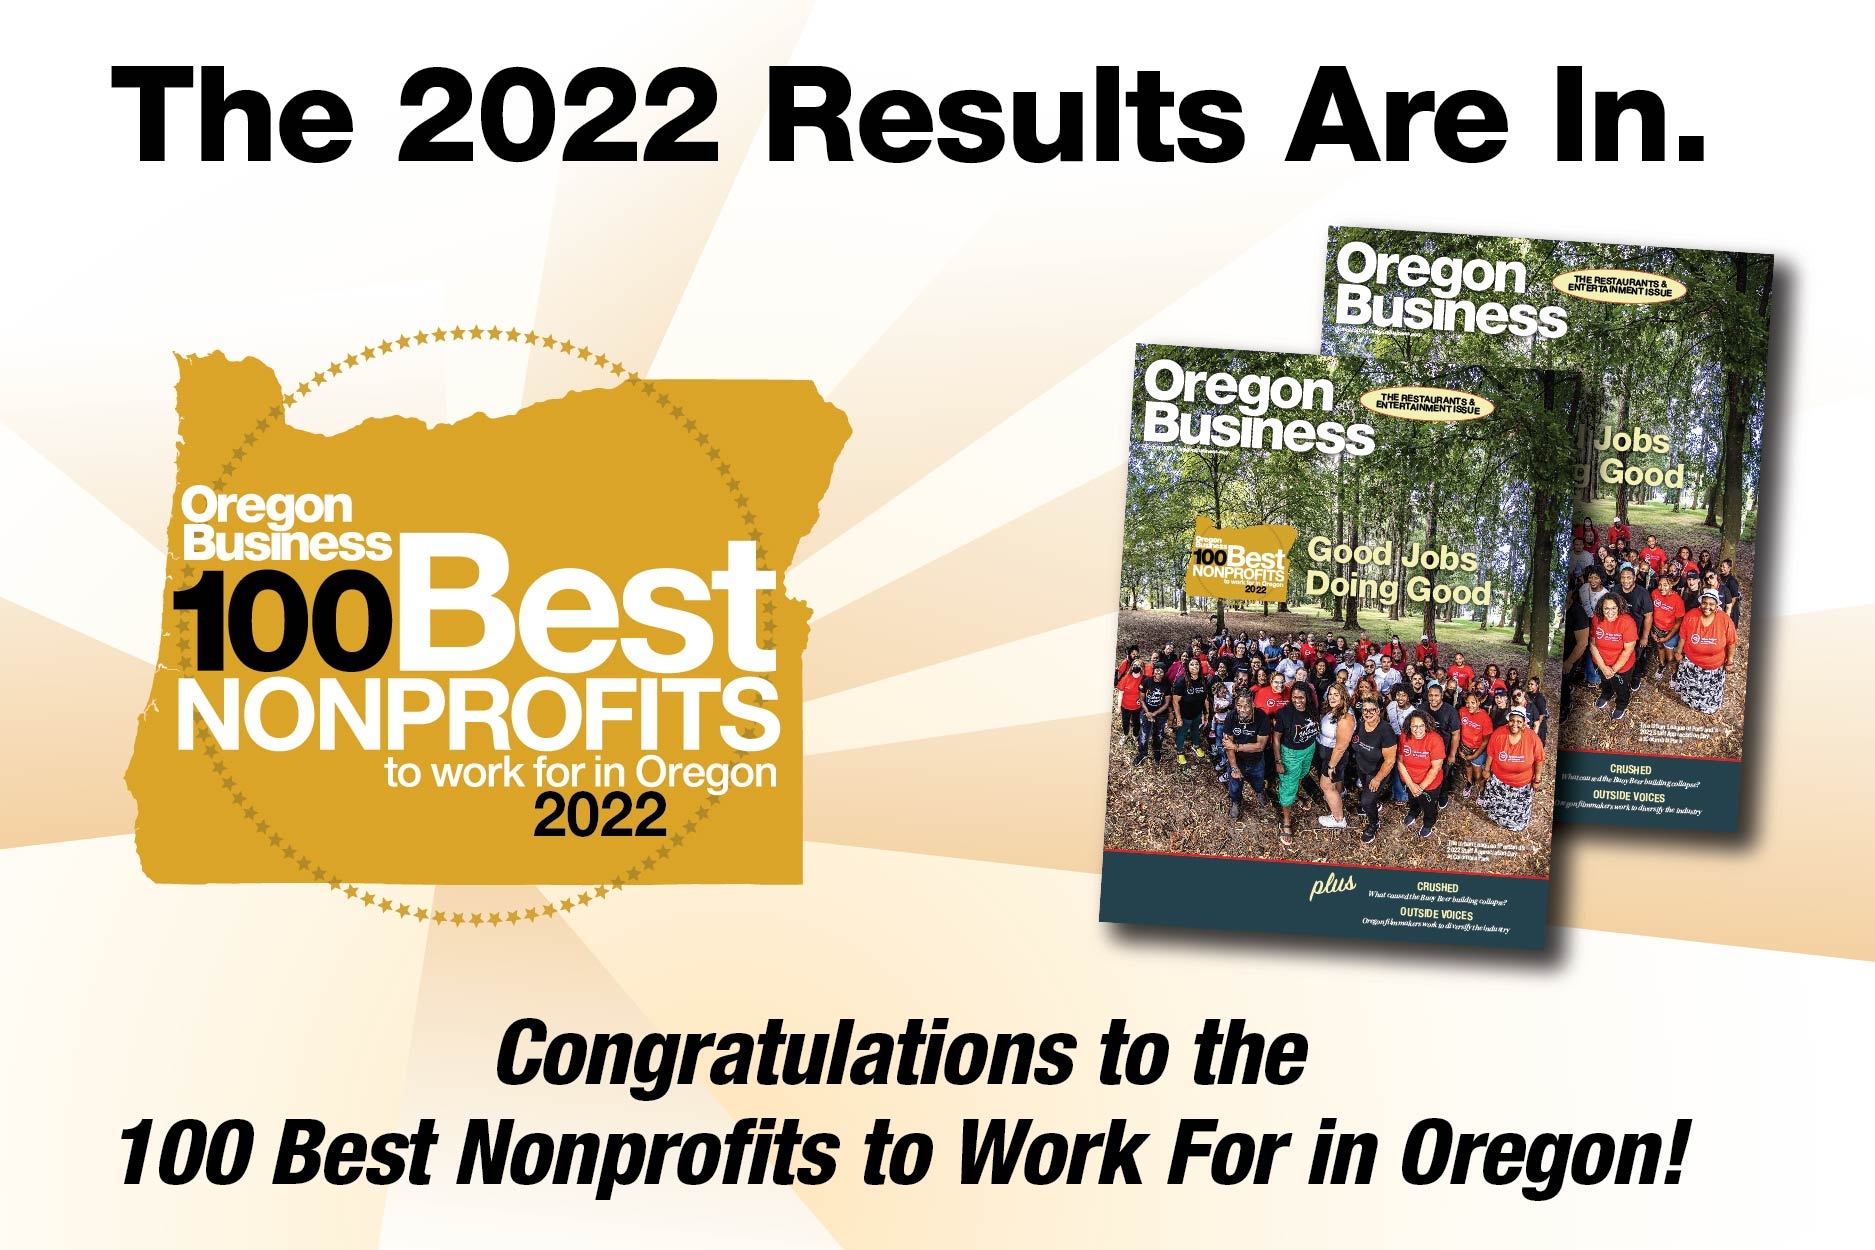 Wheels of Success Honored with Top-Rated Award from GreatNonprofits